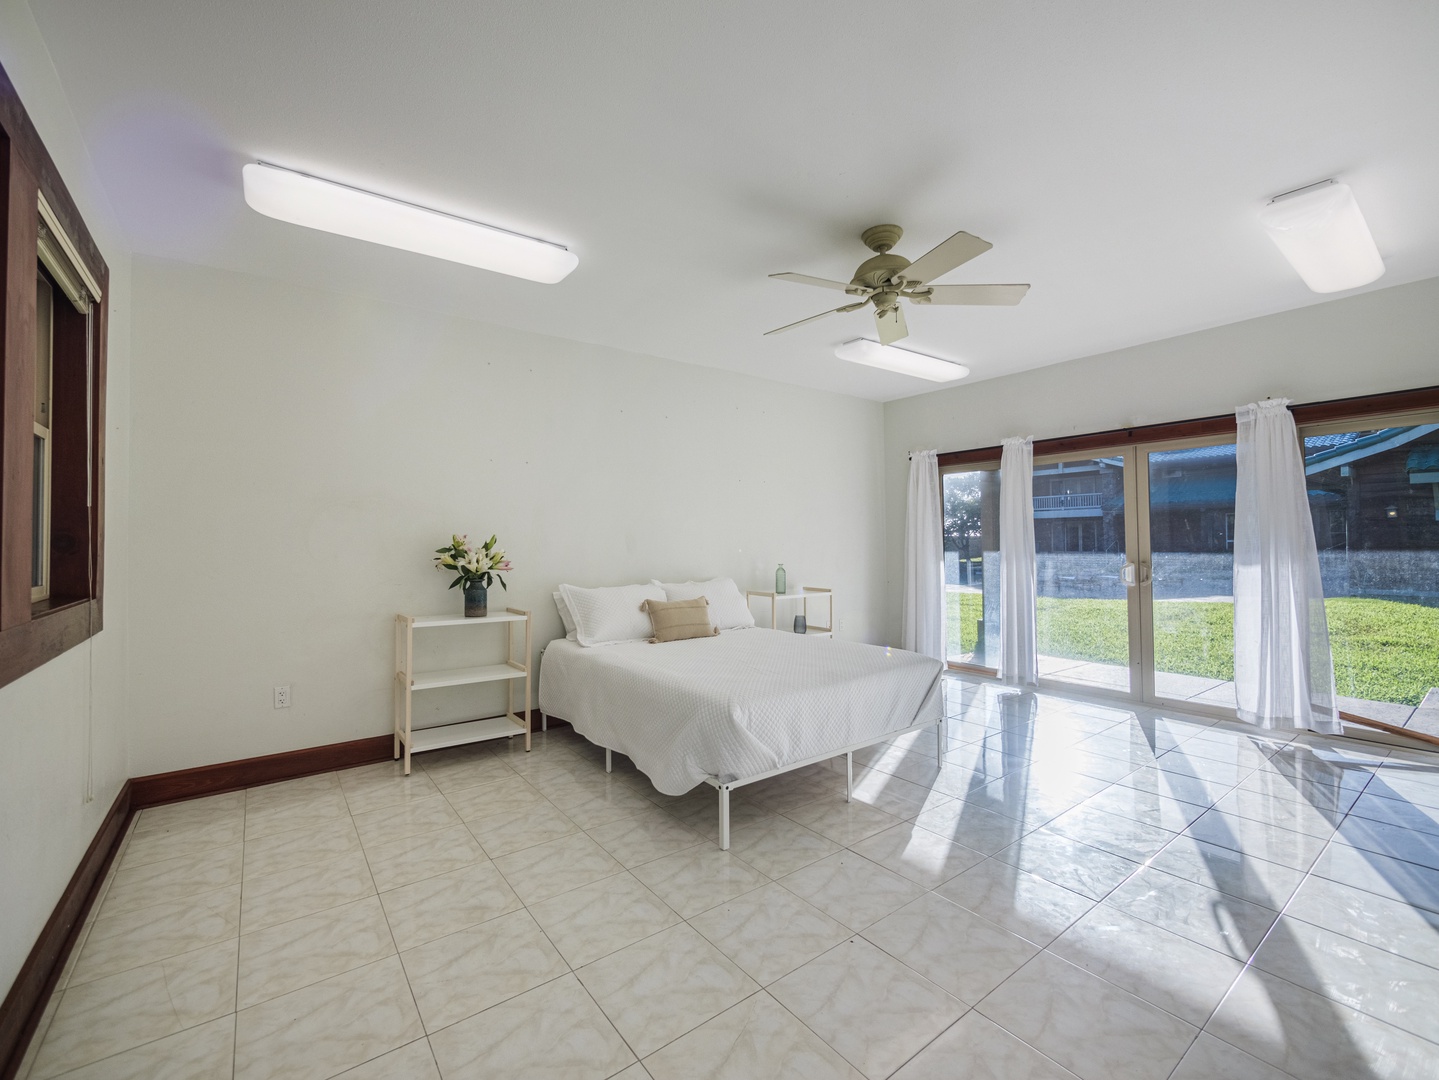 Waianae Vacation Rentals, Konishiki Beachhouse - Guest suite with easy access to outdoors.